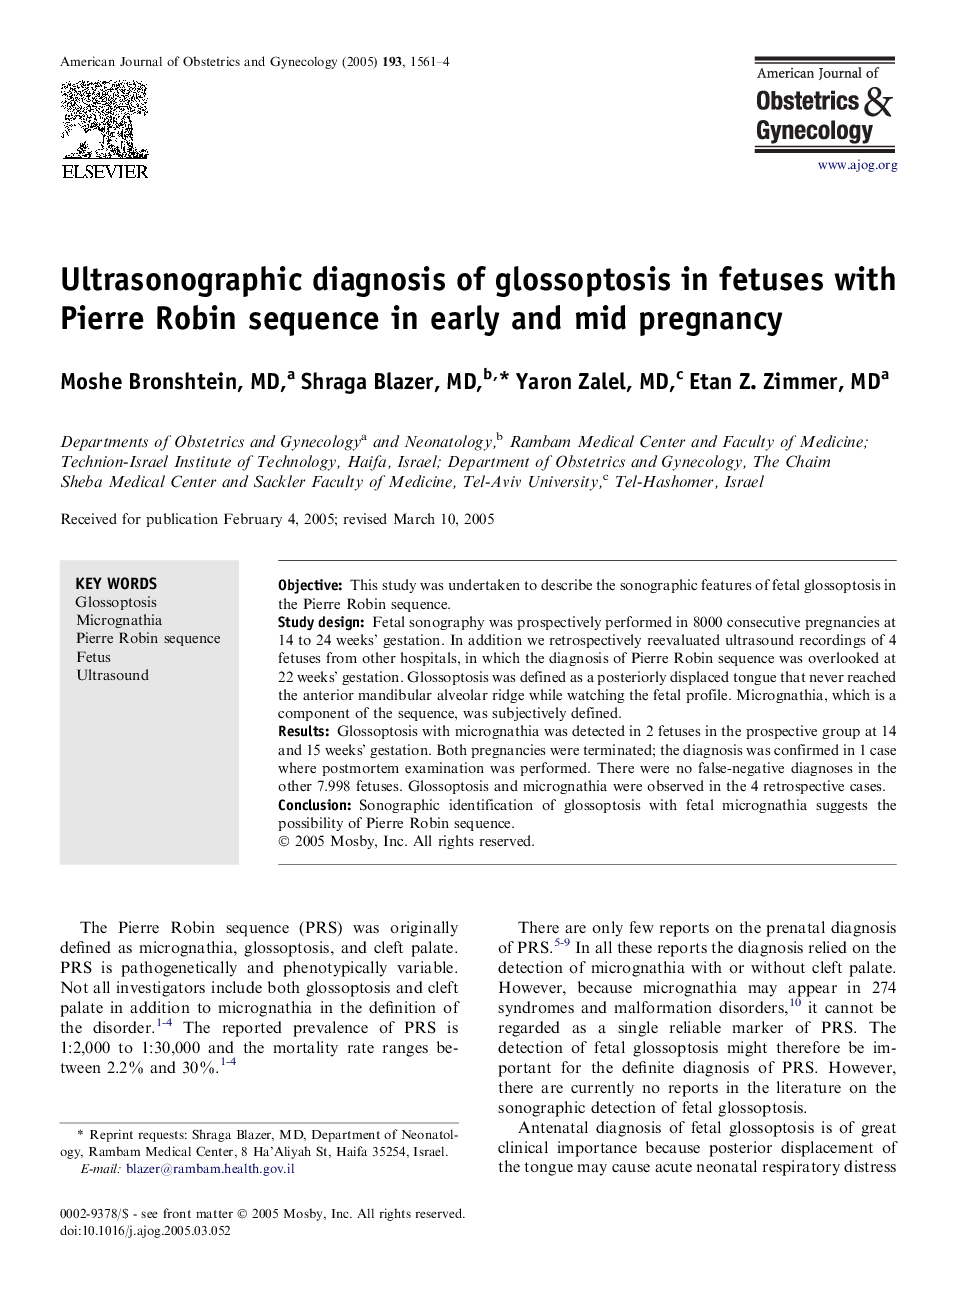 Ultrasonographic diagnosis of glossoptosis in fetuses with Pierre Robin sequence in early and mid pregnancy